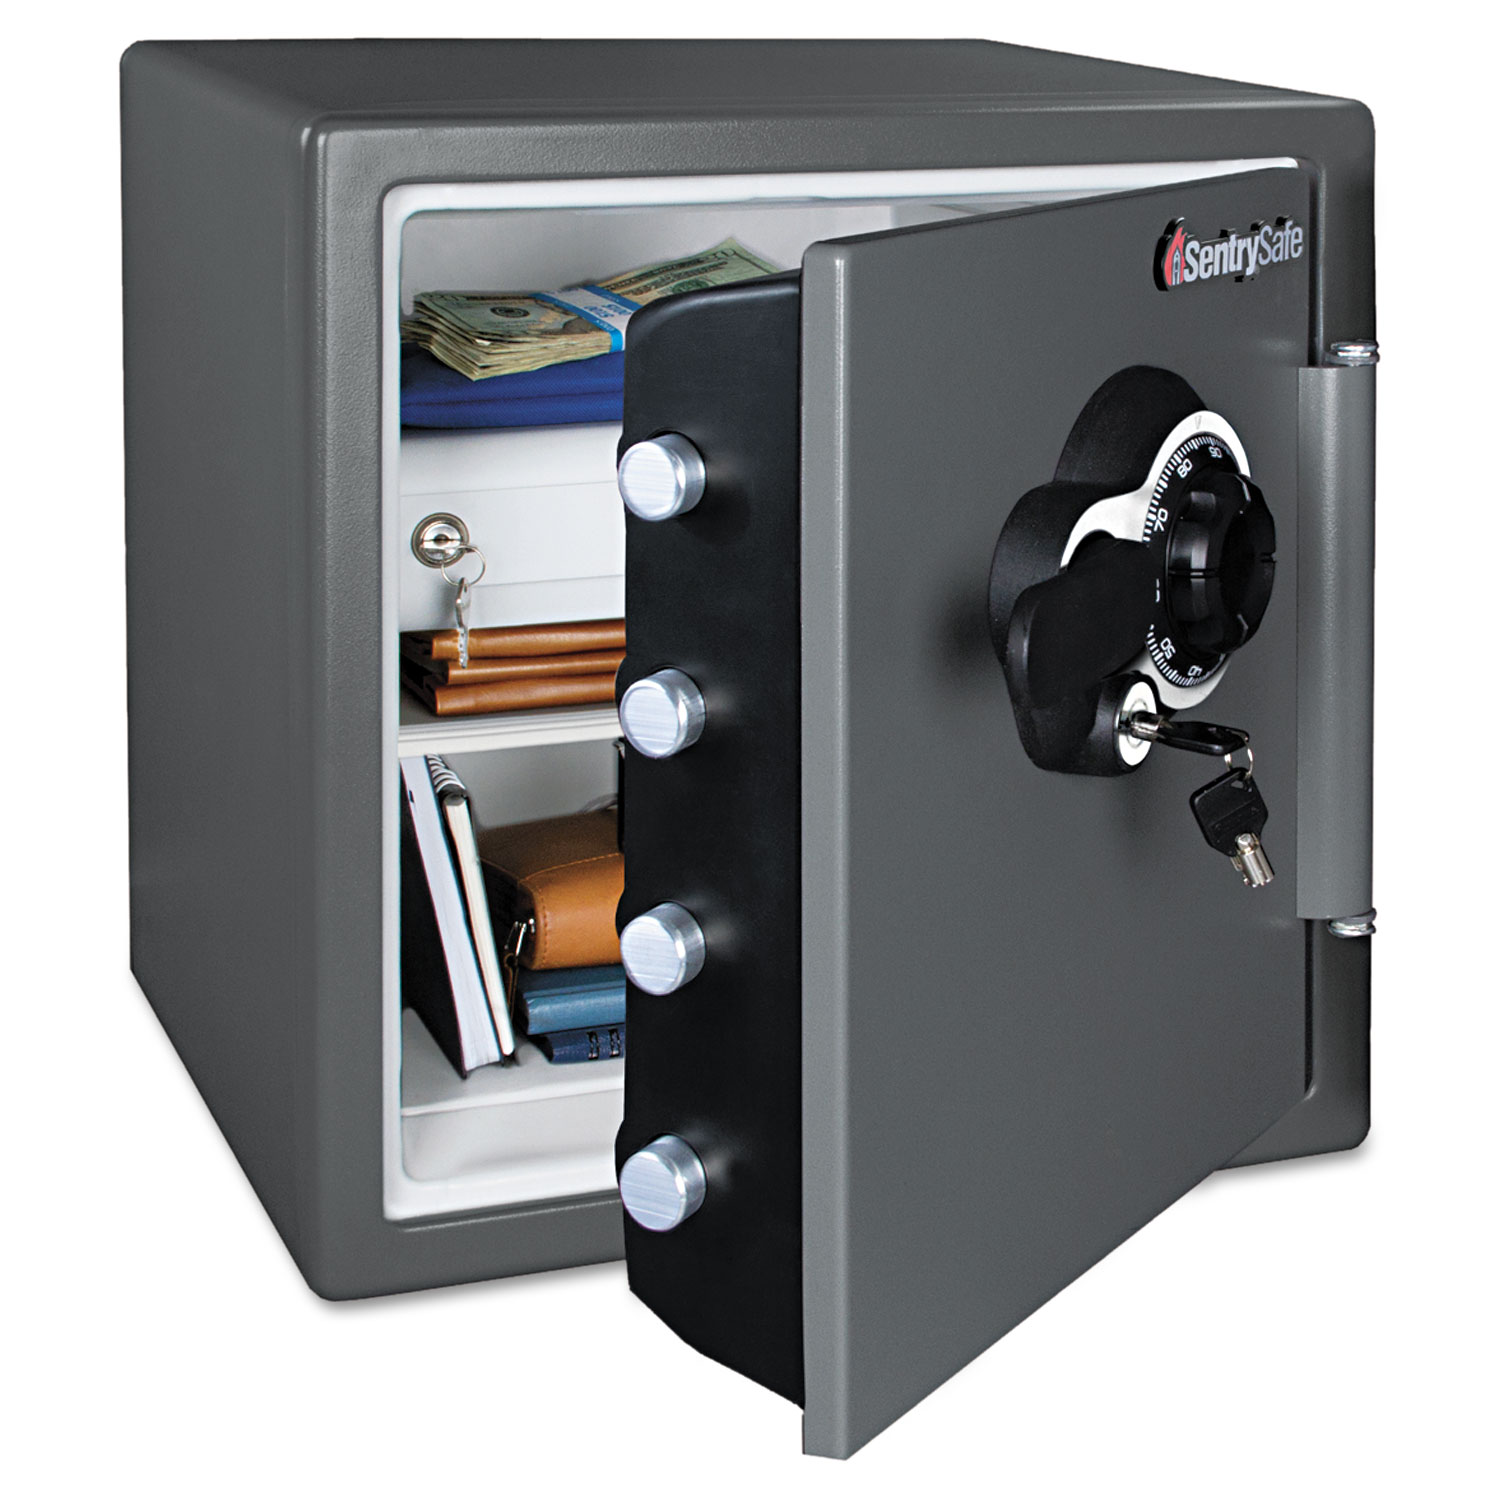  Sentry Safe SFW123CSB Fire-Safe with Combination Access, 1.23 cu ft, 16.38w x 19.38d x 17.88h, Gray (SENSFW123CSB) 